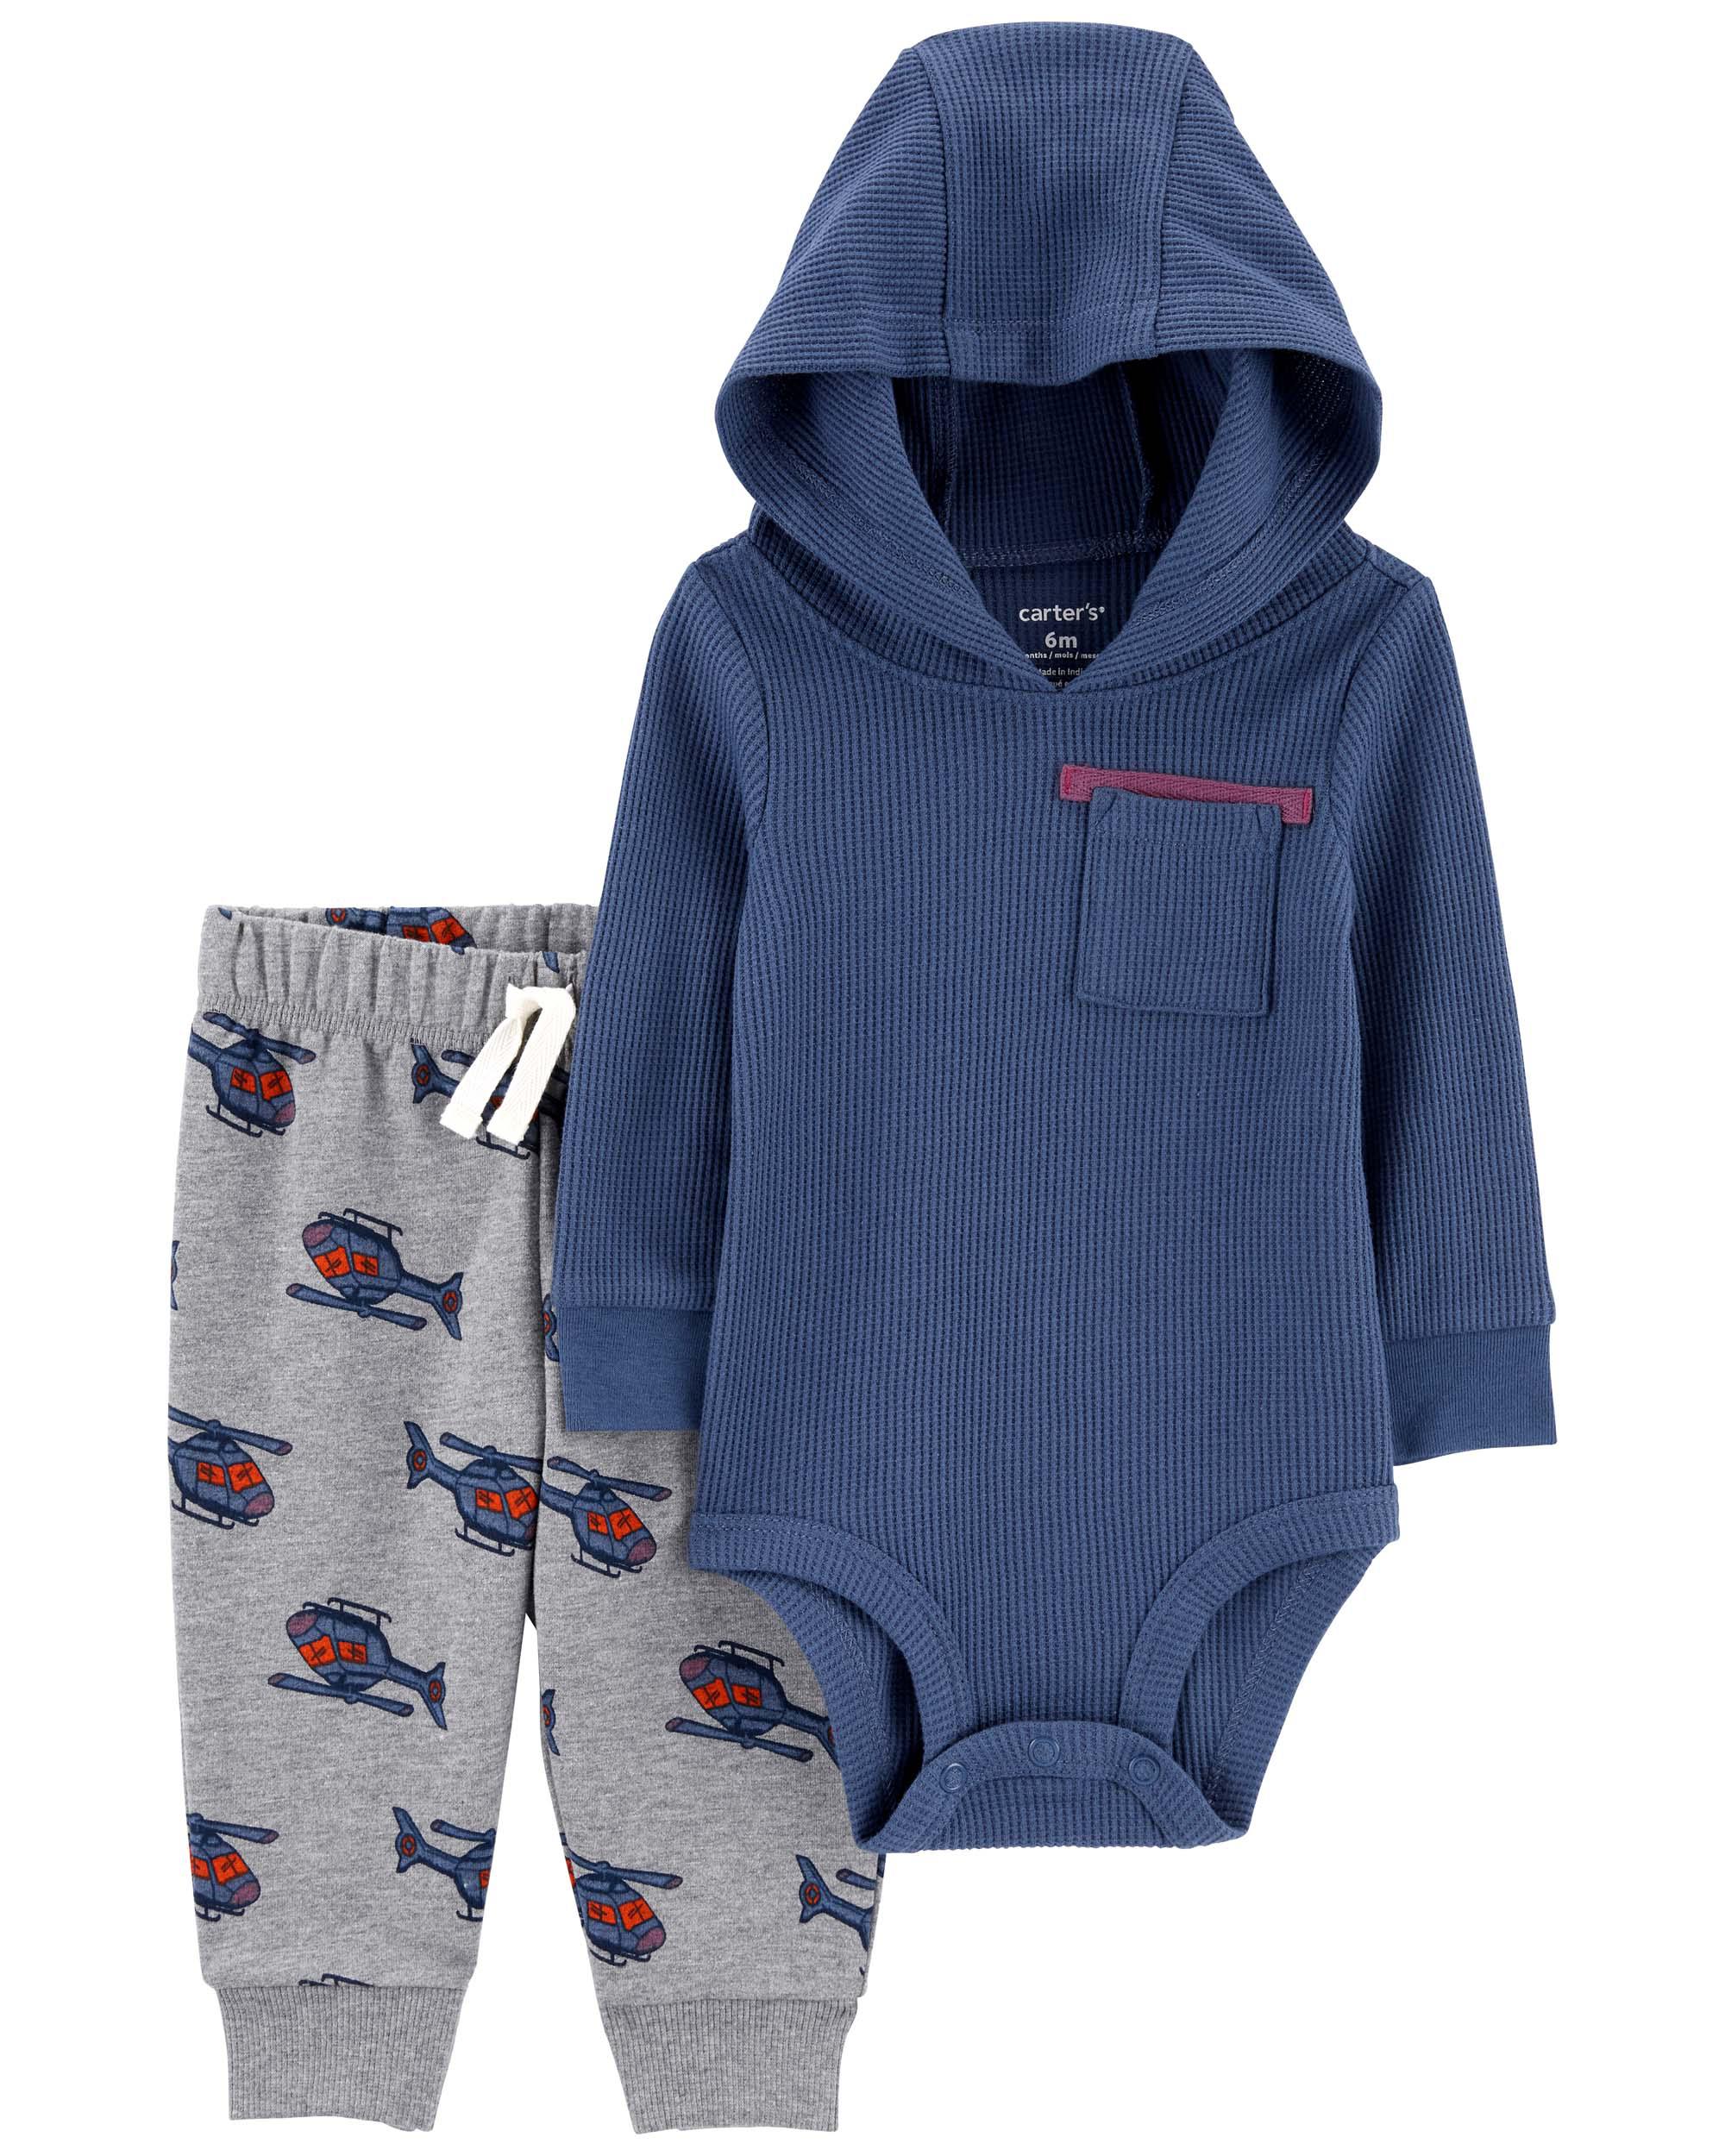 Navy/Heather 2-Piece Thermal Hooded Bodysuit Pant Set